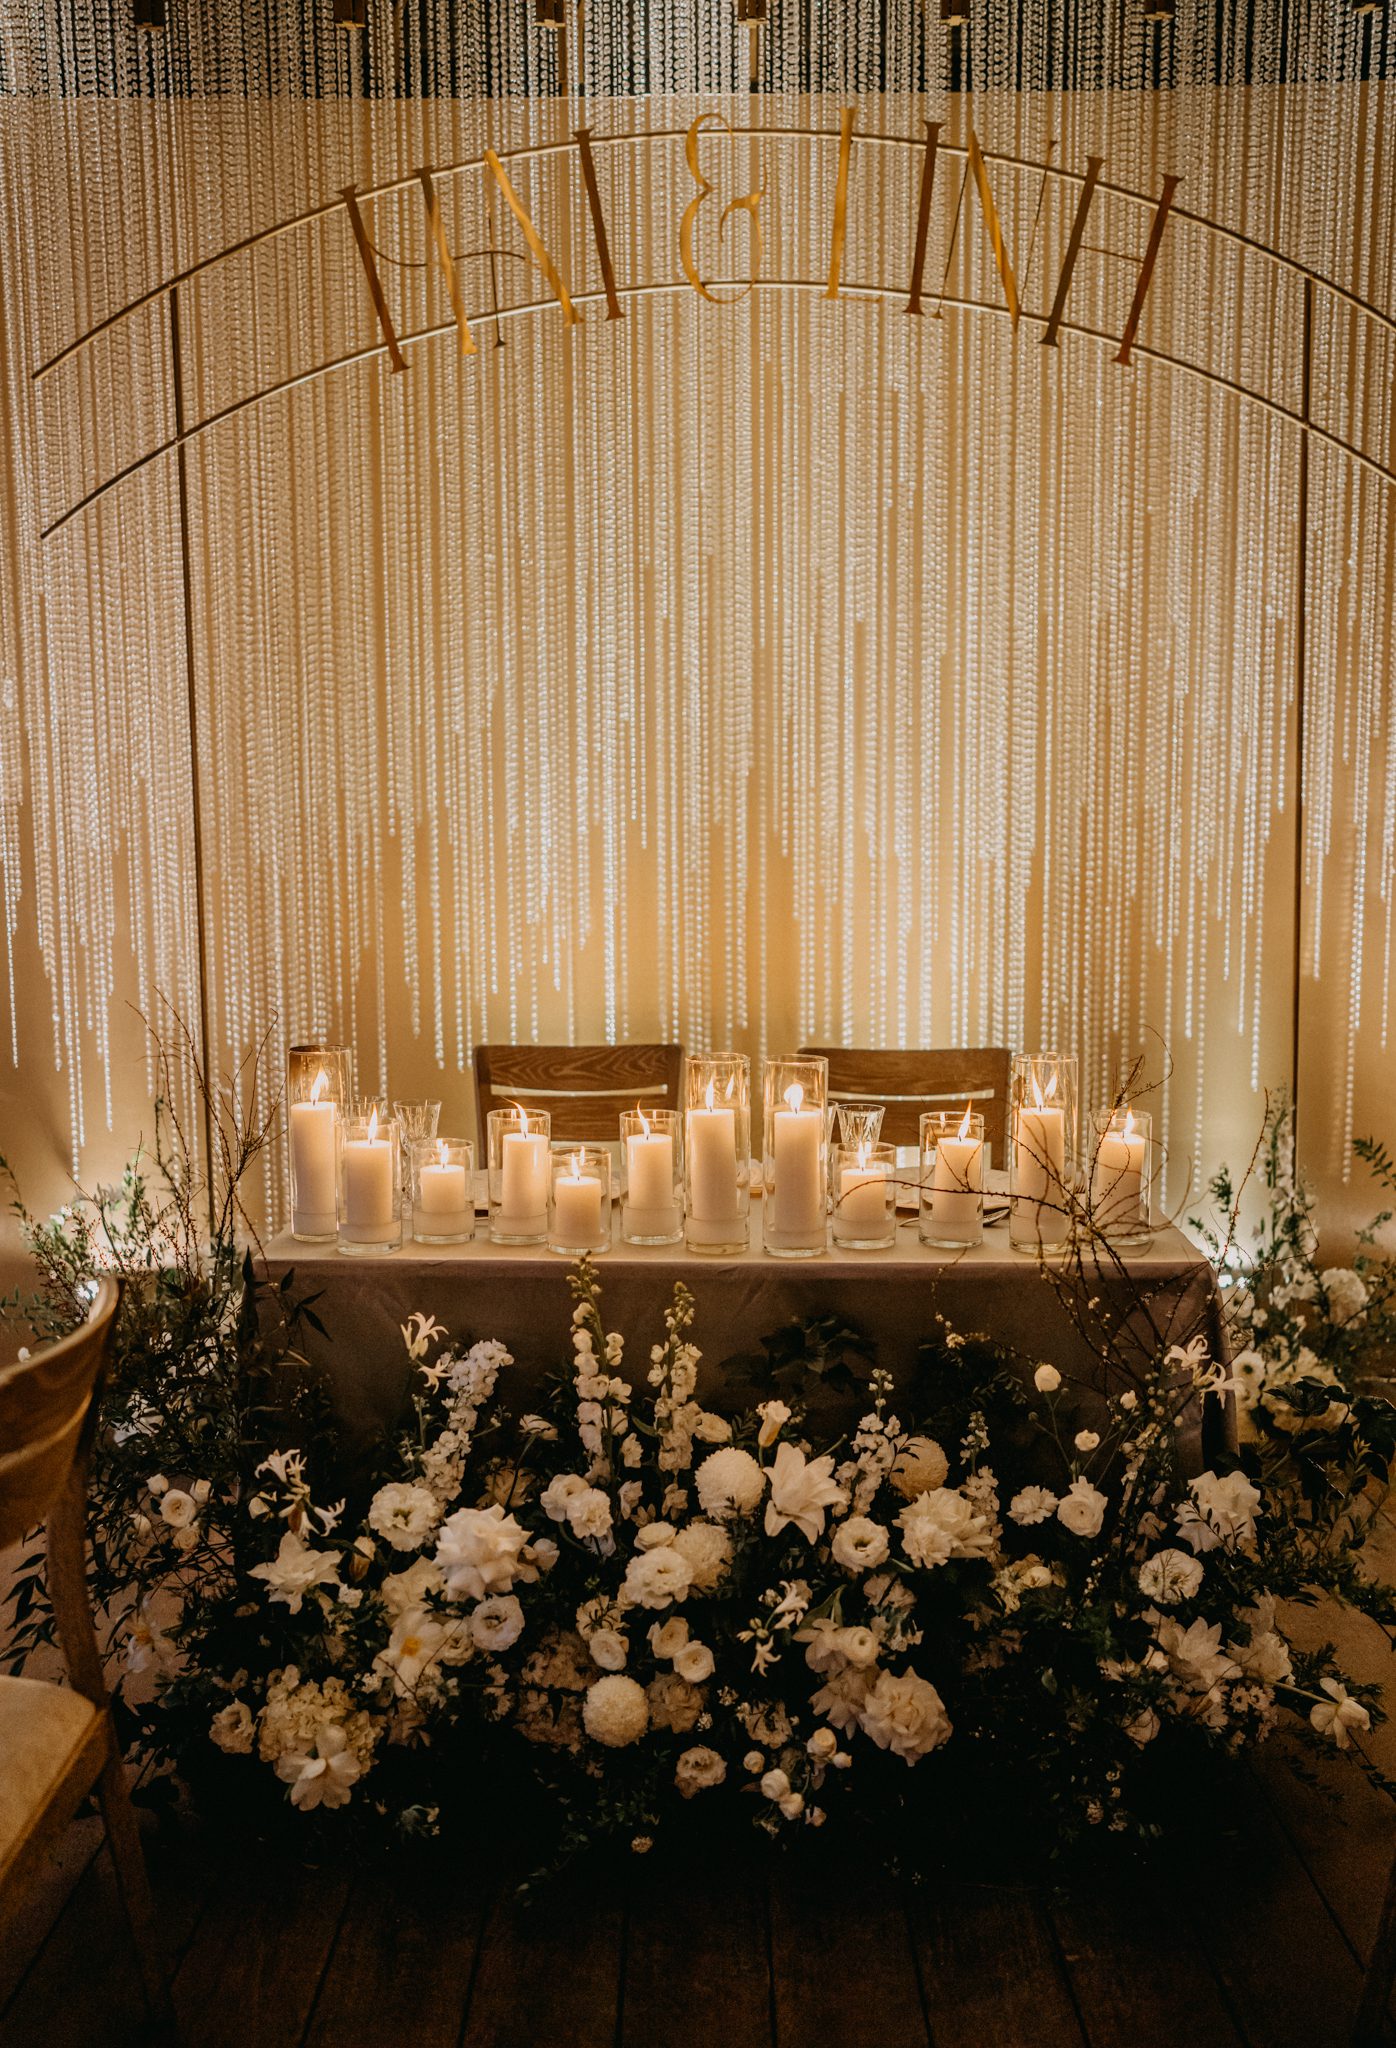 Saigon intimate wedding at An Lam Retreat 5009 - The Planners